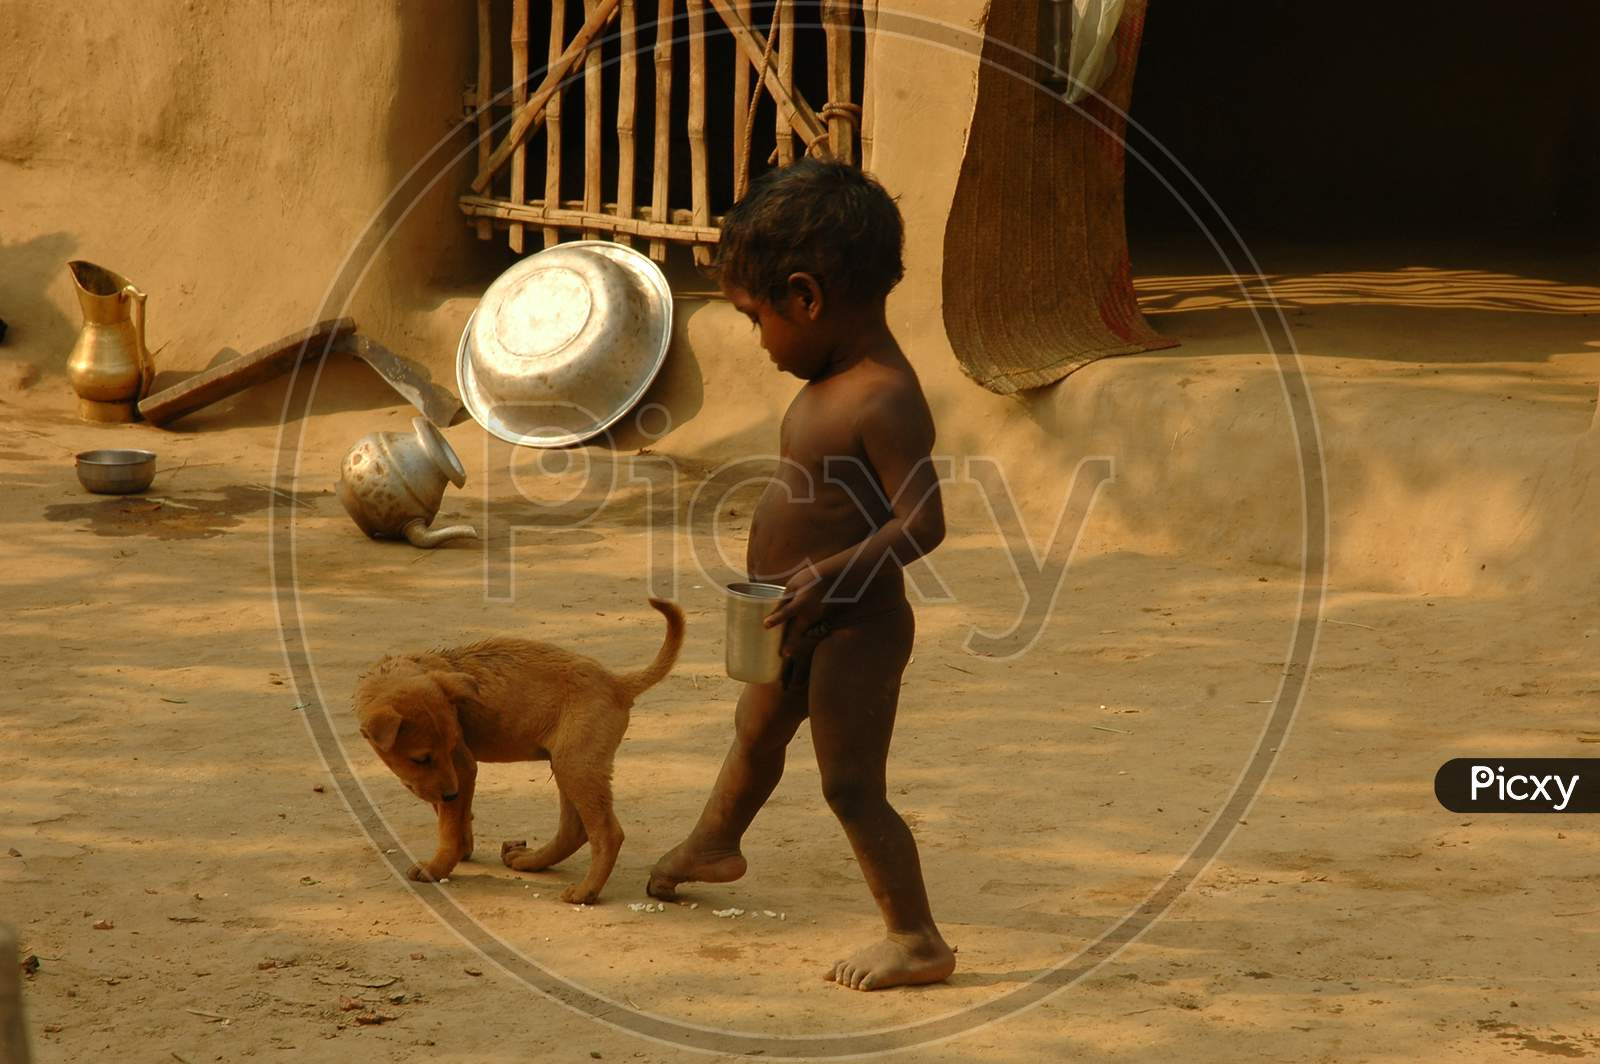 A Tribal Village Boy Playing With a Dog In An Tribal  Village Near Murshidabad , West Bengal